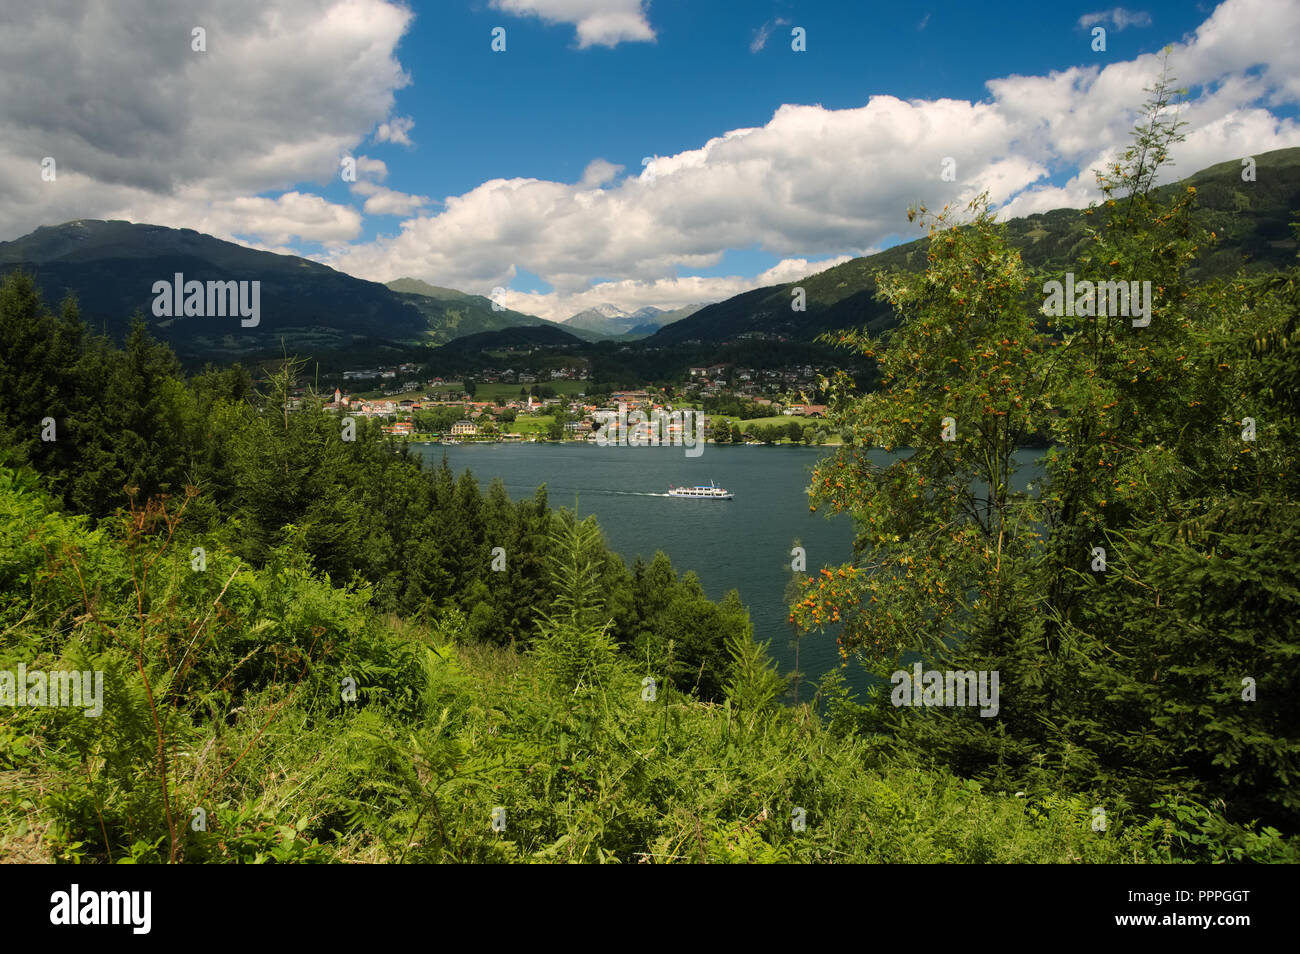 A view at Millstatter sea near the town Seeboden, Austria. Stock Photo